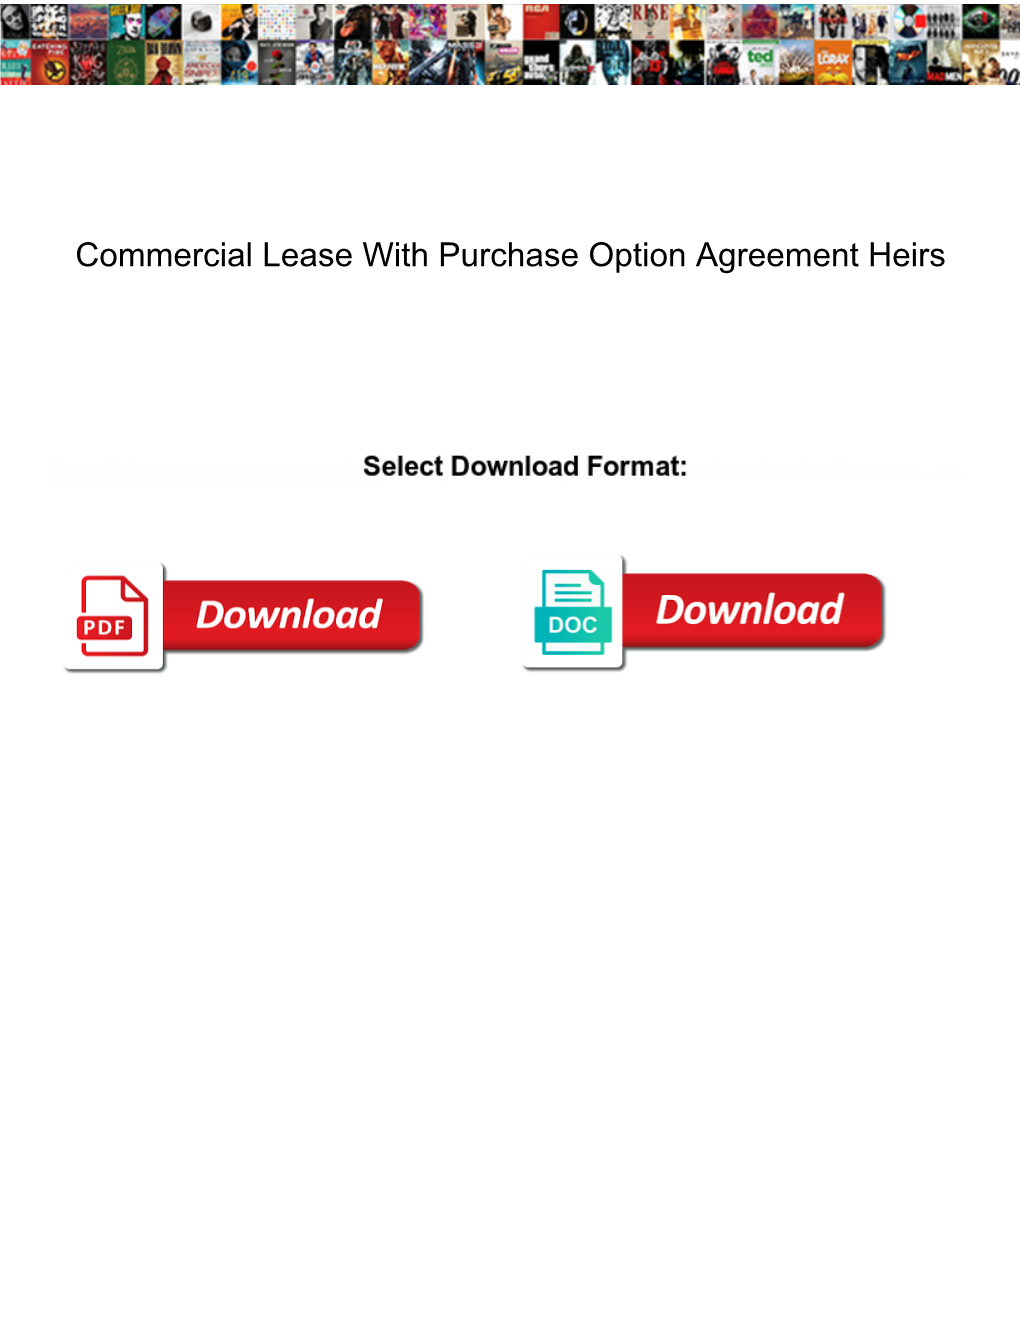 Commercial Lease with Purchase Option Agreement Heirs